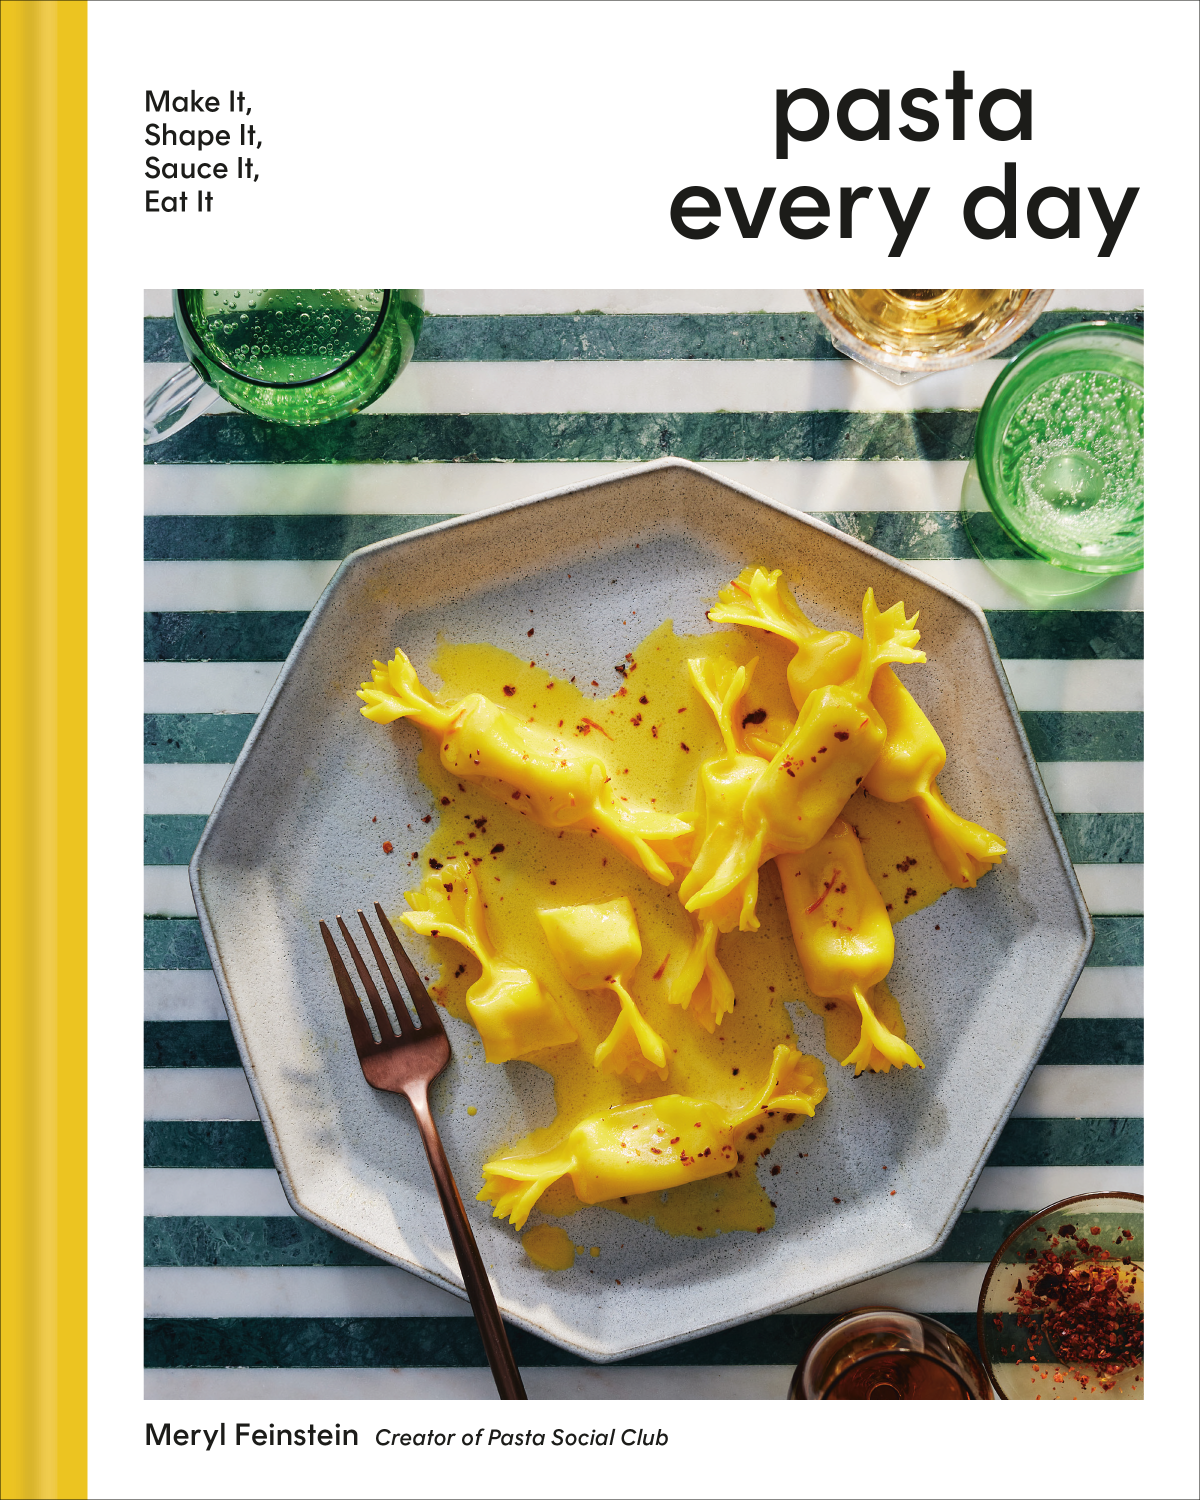 The cover of Pasta Every Day cookbook: A dish of yellow pinched pasta on a ceramic plate atop green and white stripes